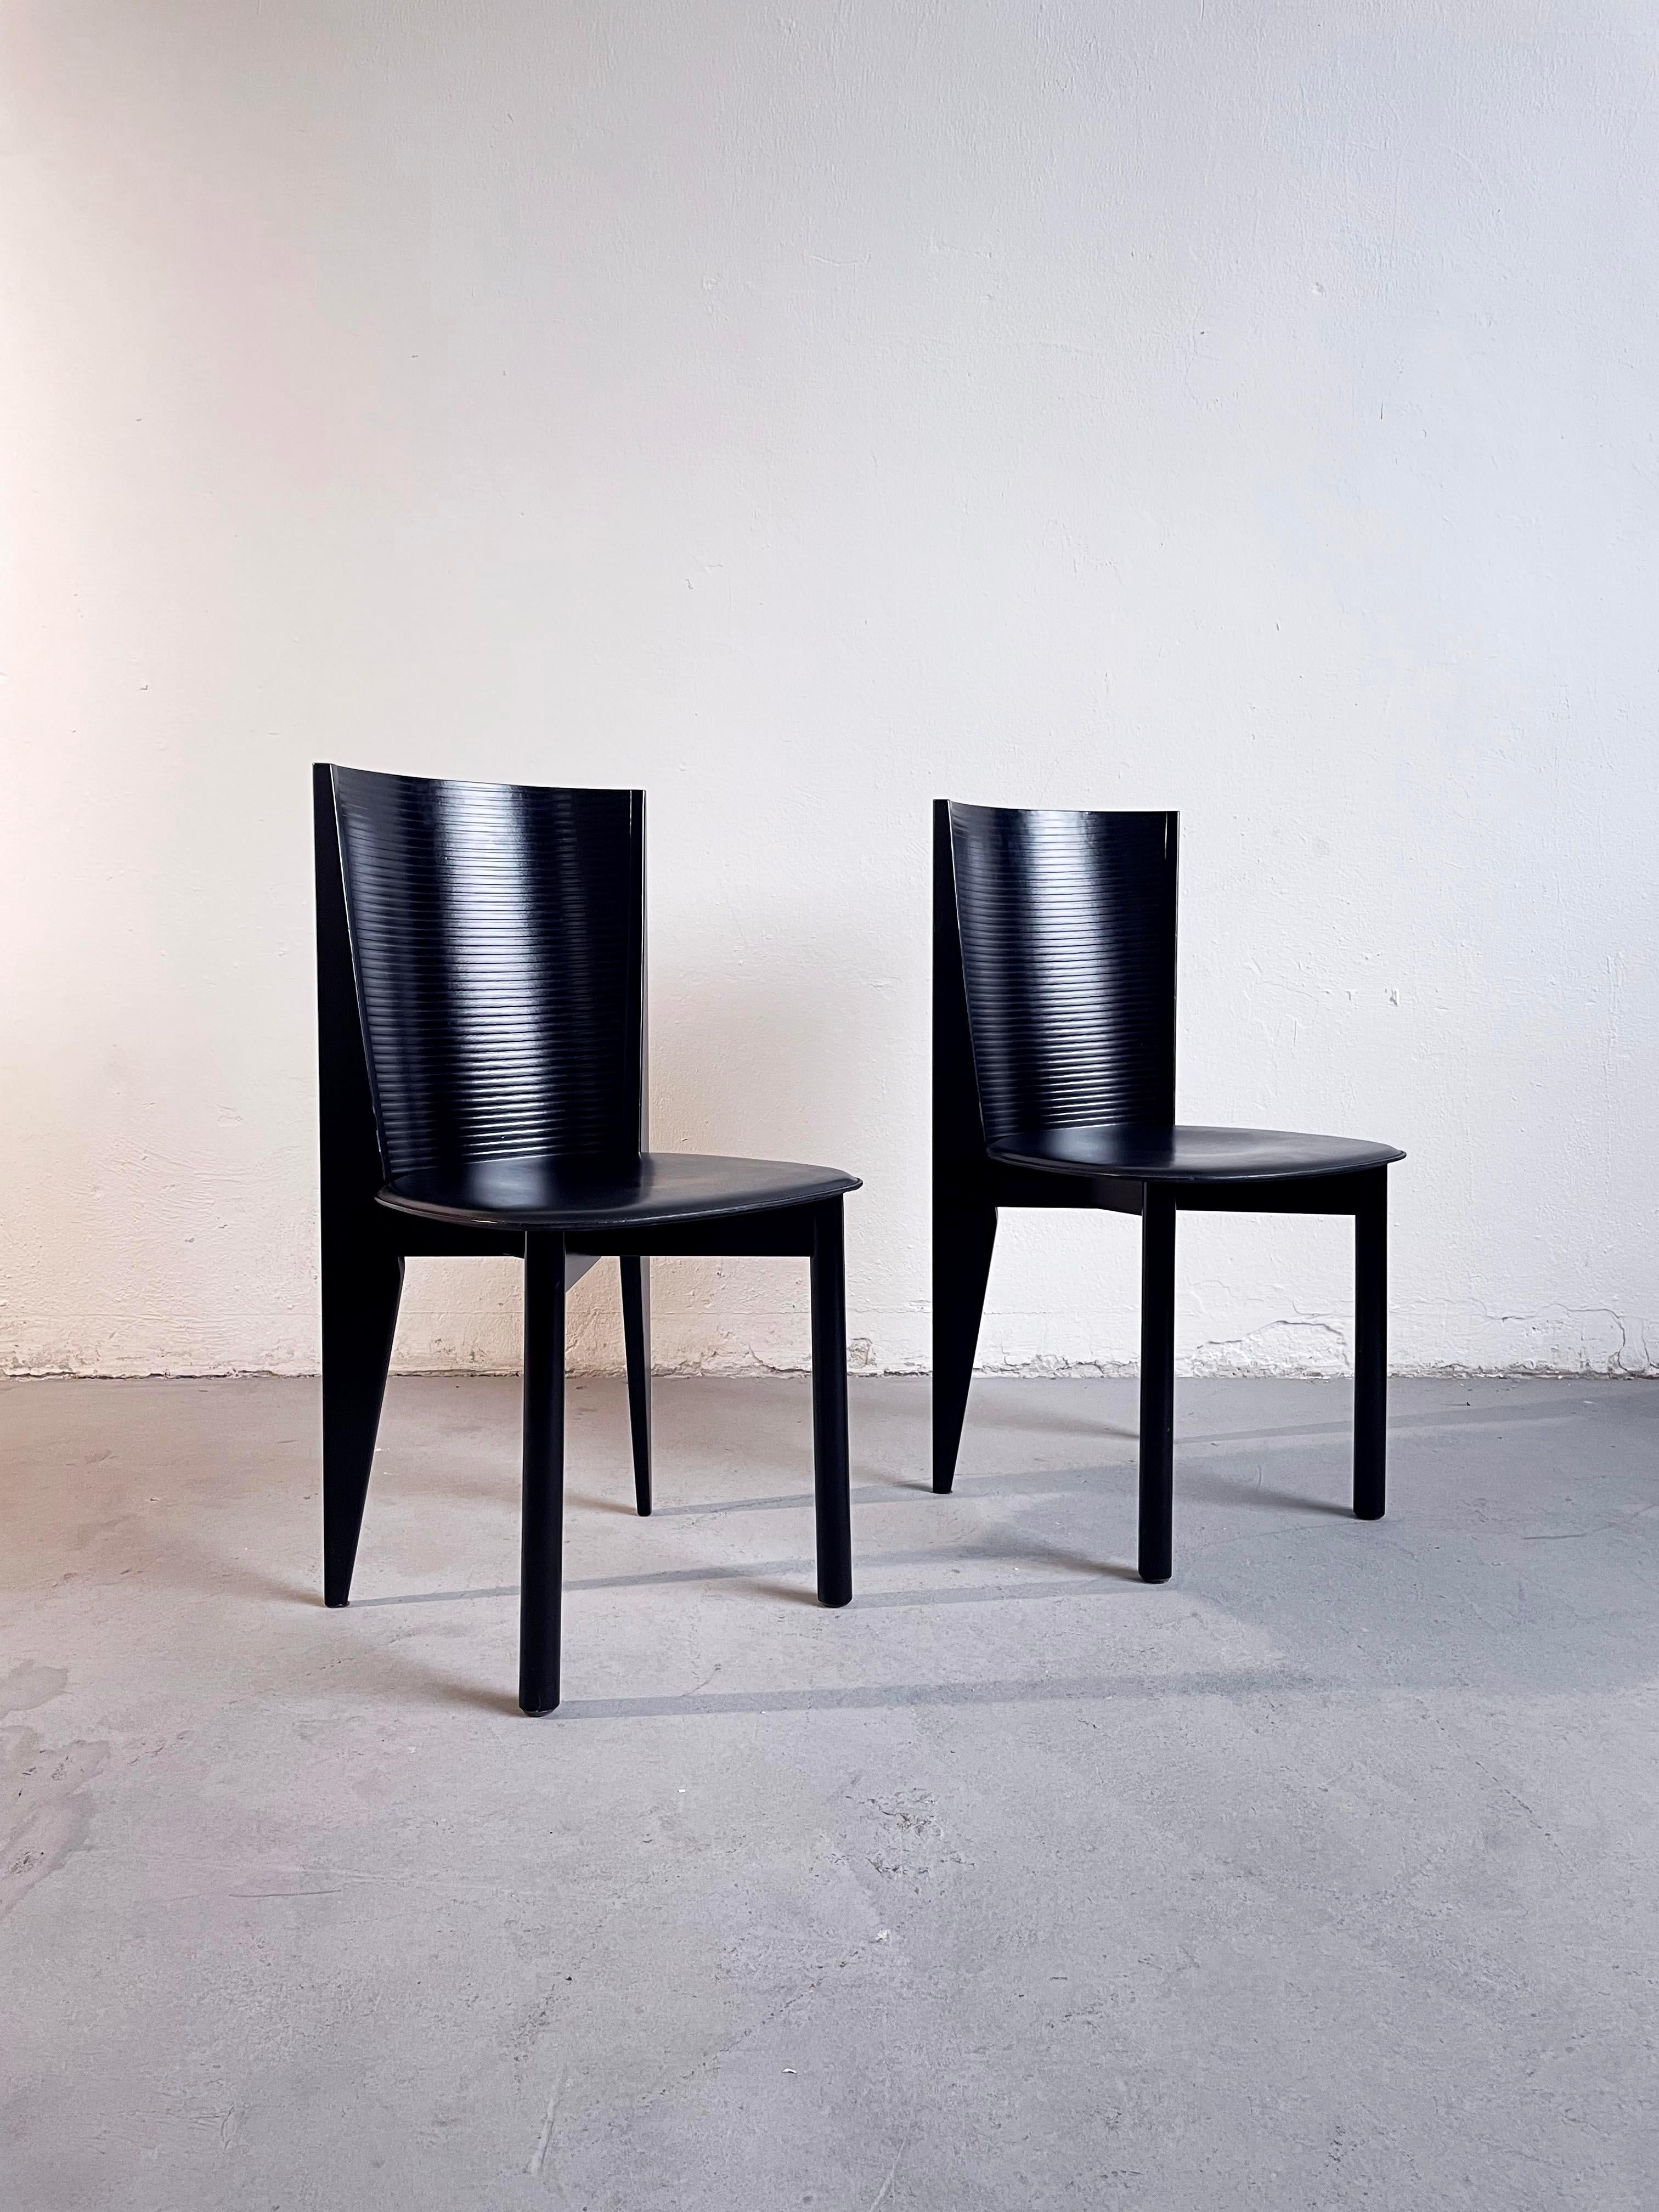 Pair of stunning postmodern Italian dining chairs produced by Calligaris in the 1980s
The chairs feature a black sculptural lacquered wooden frame and a black leather seat

Marked 'Calligaris' on bottom
Both chairs are in very good condition.